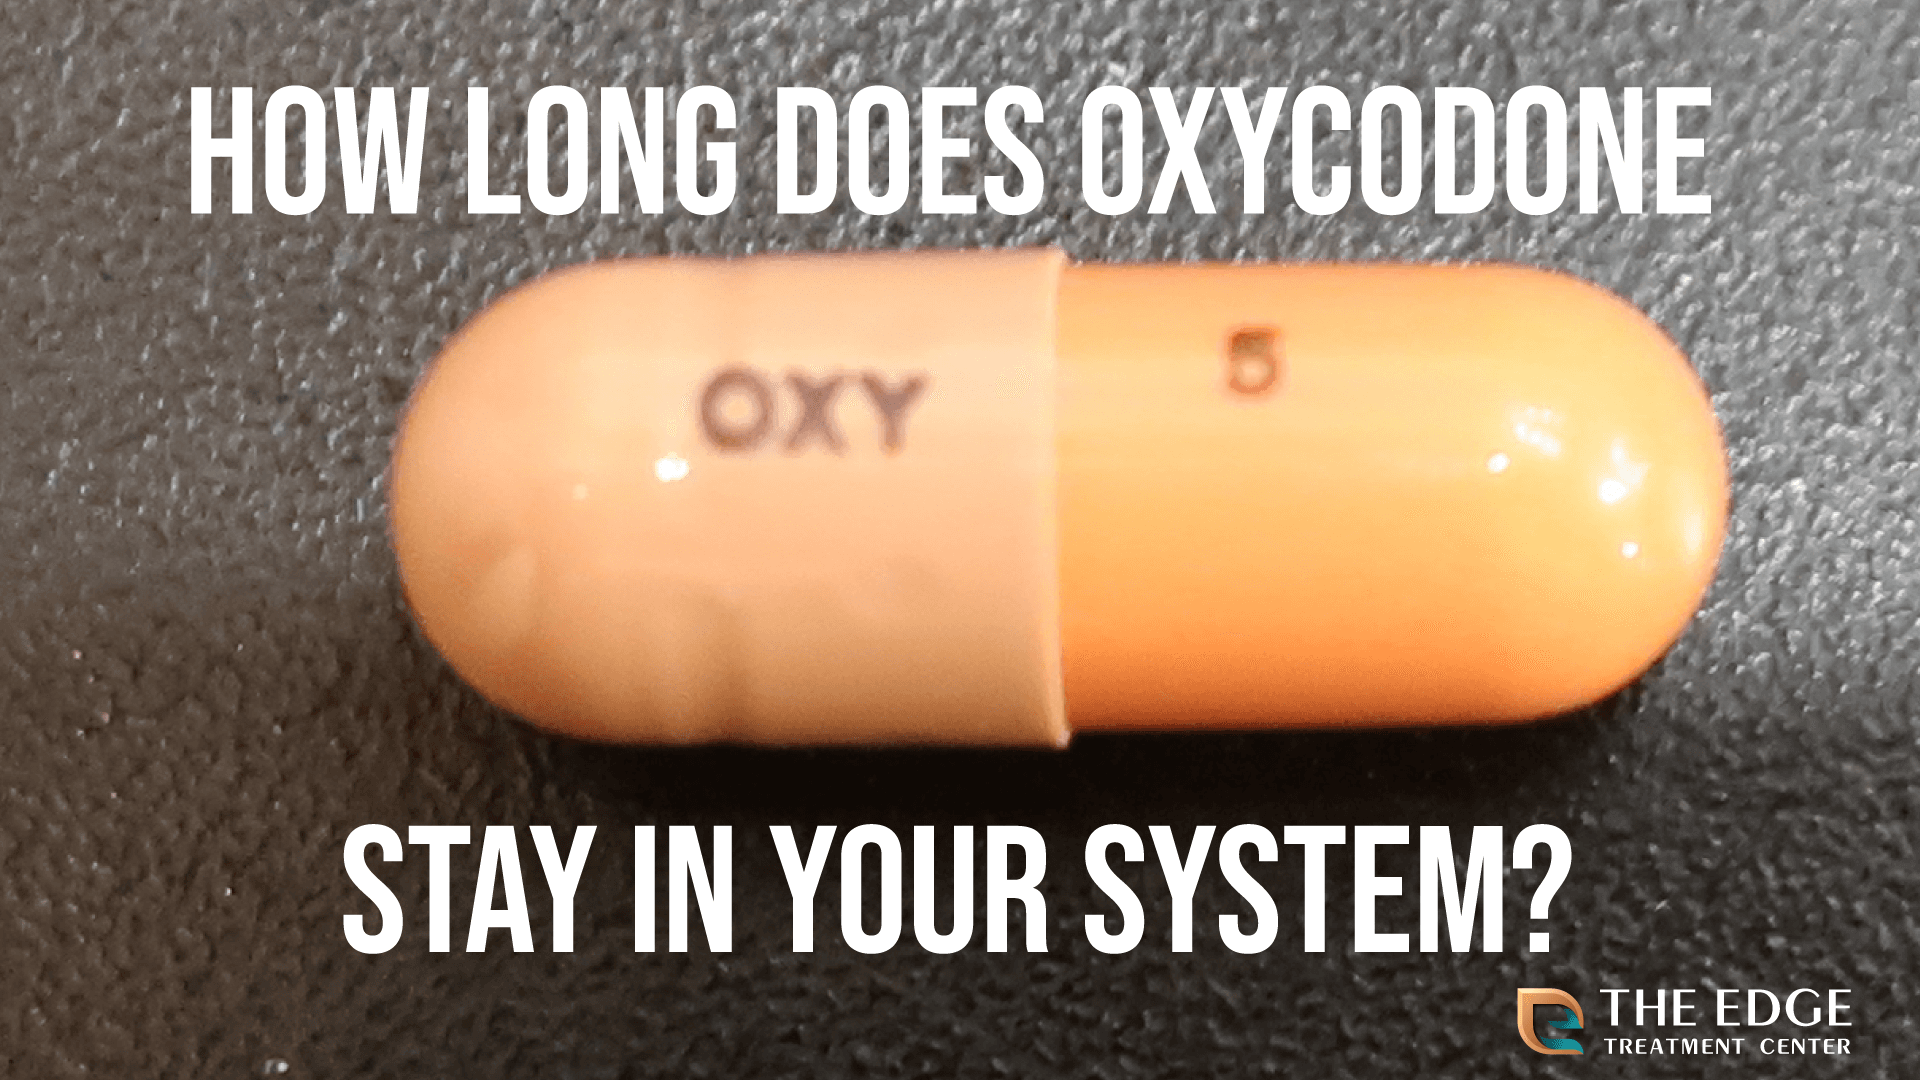 How Long Does Oxycodone Stay in Your System?